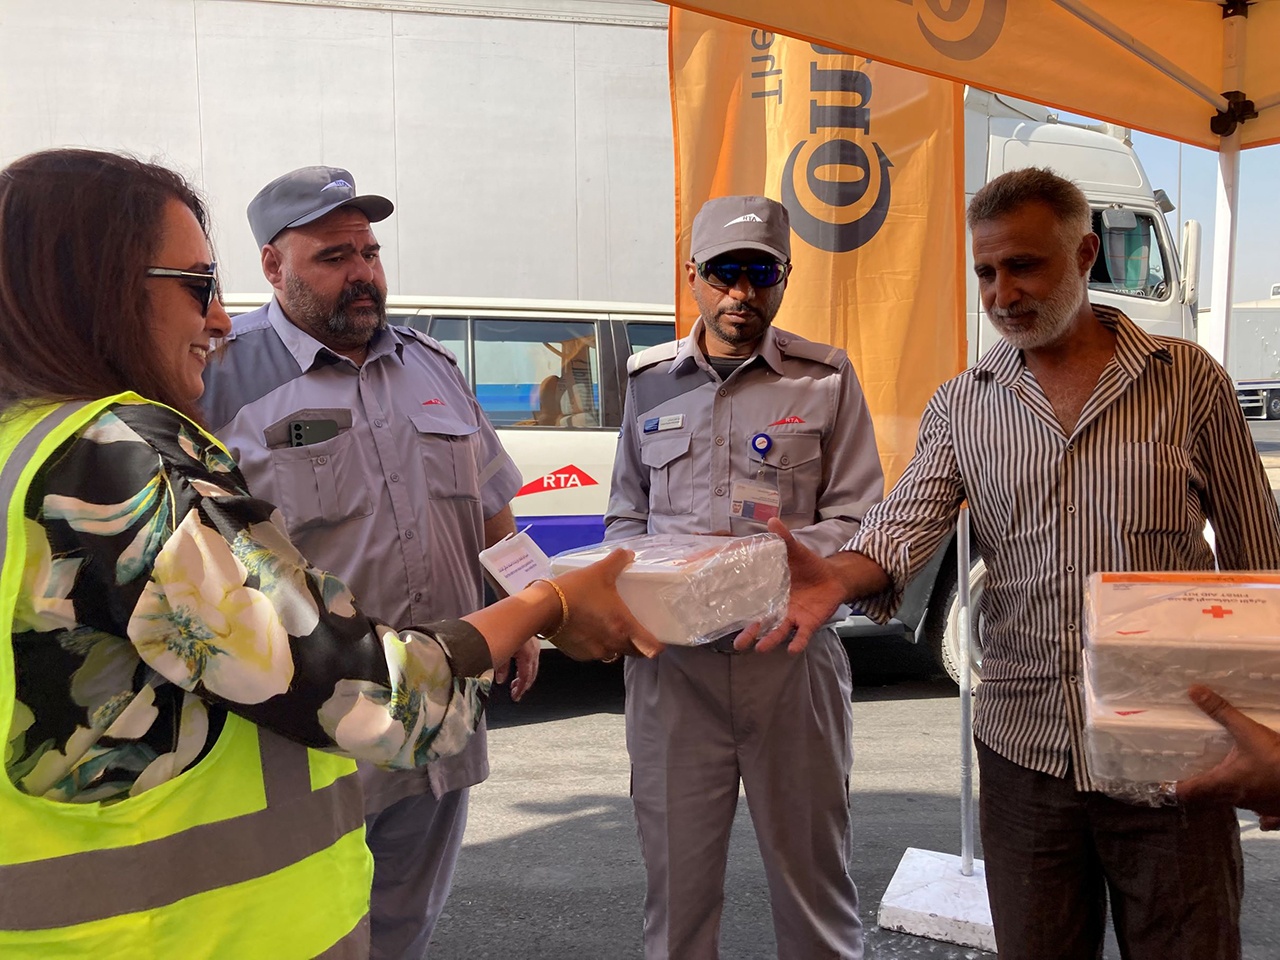 TOGETHER FOR SAFETY: DUBAI'S RTA AND CONTINENTAL REUNITE FOR TRUCK SAFETY AWARENESS CAMPAIGN